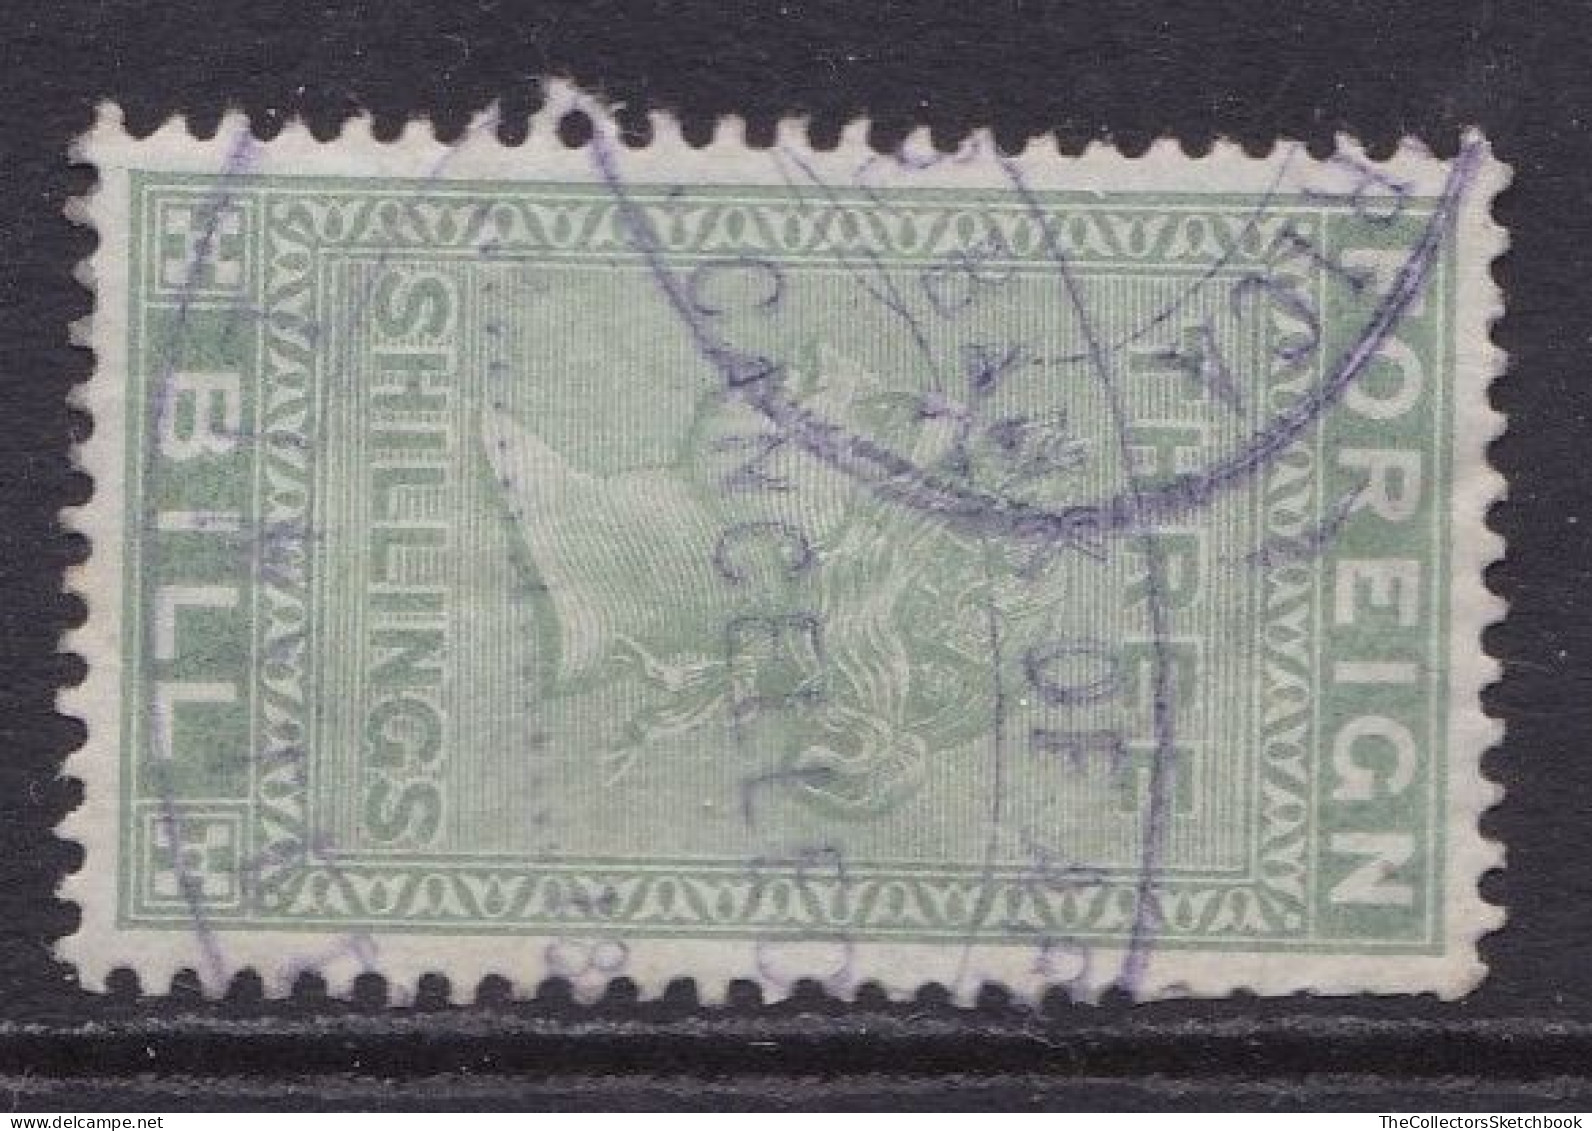 GB Fiscal/ Revenue Stamp. Foreign Bill 3/ - Green  Perf 14 Barefoot 92 - Fiscale Zegels